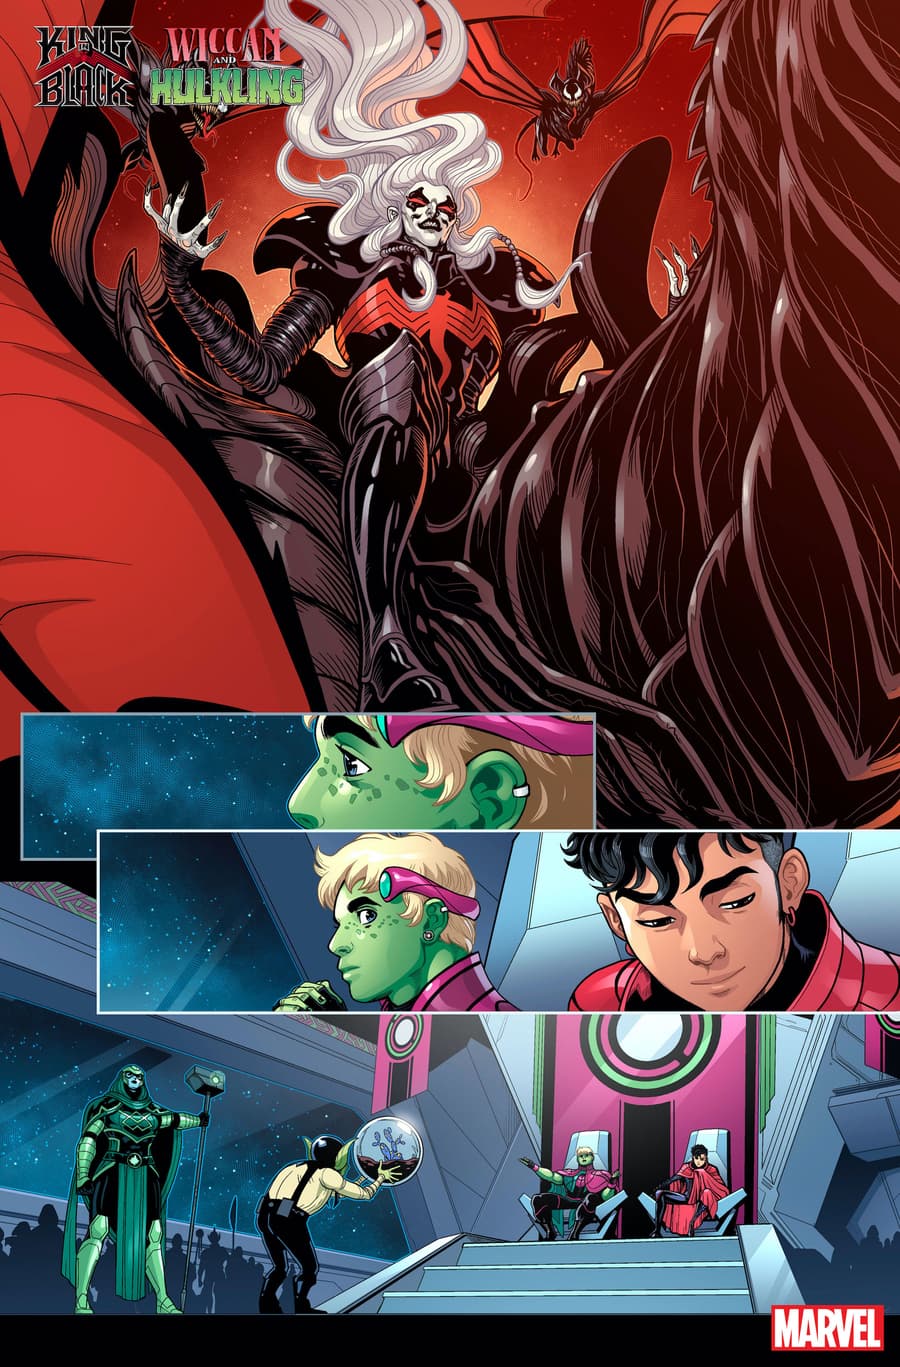 KING IN BLACK: WICCAN AND HULKLING #1 preview art by Luciano Vecchio with colors by Espen Grundetjern